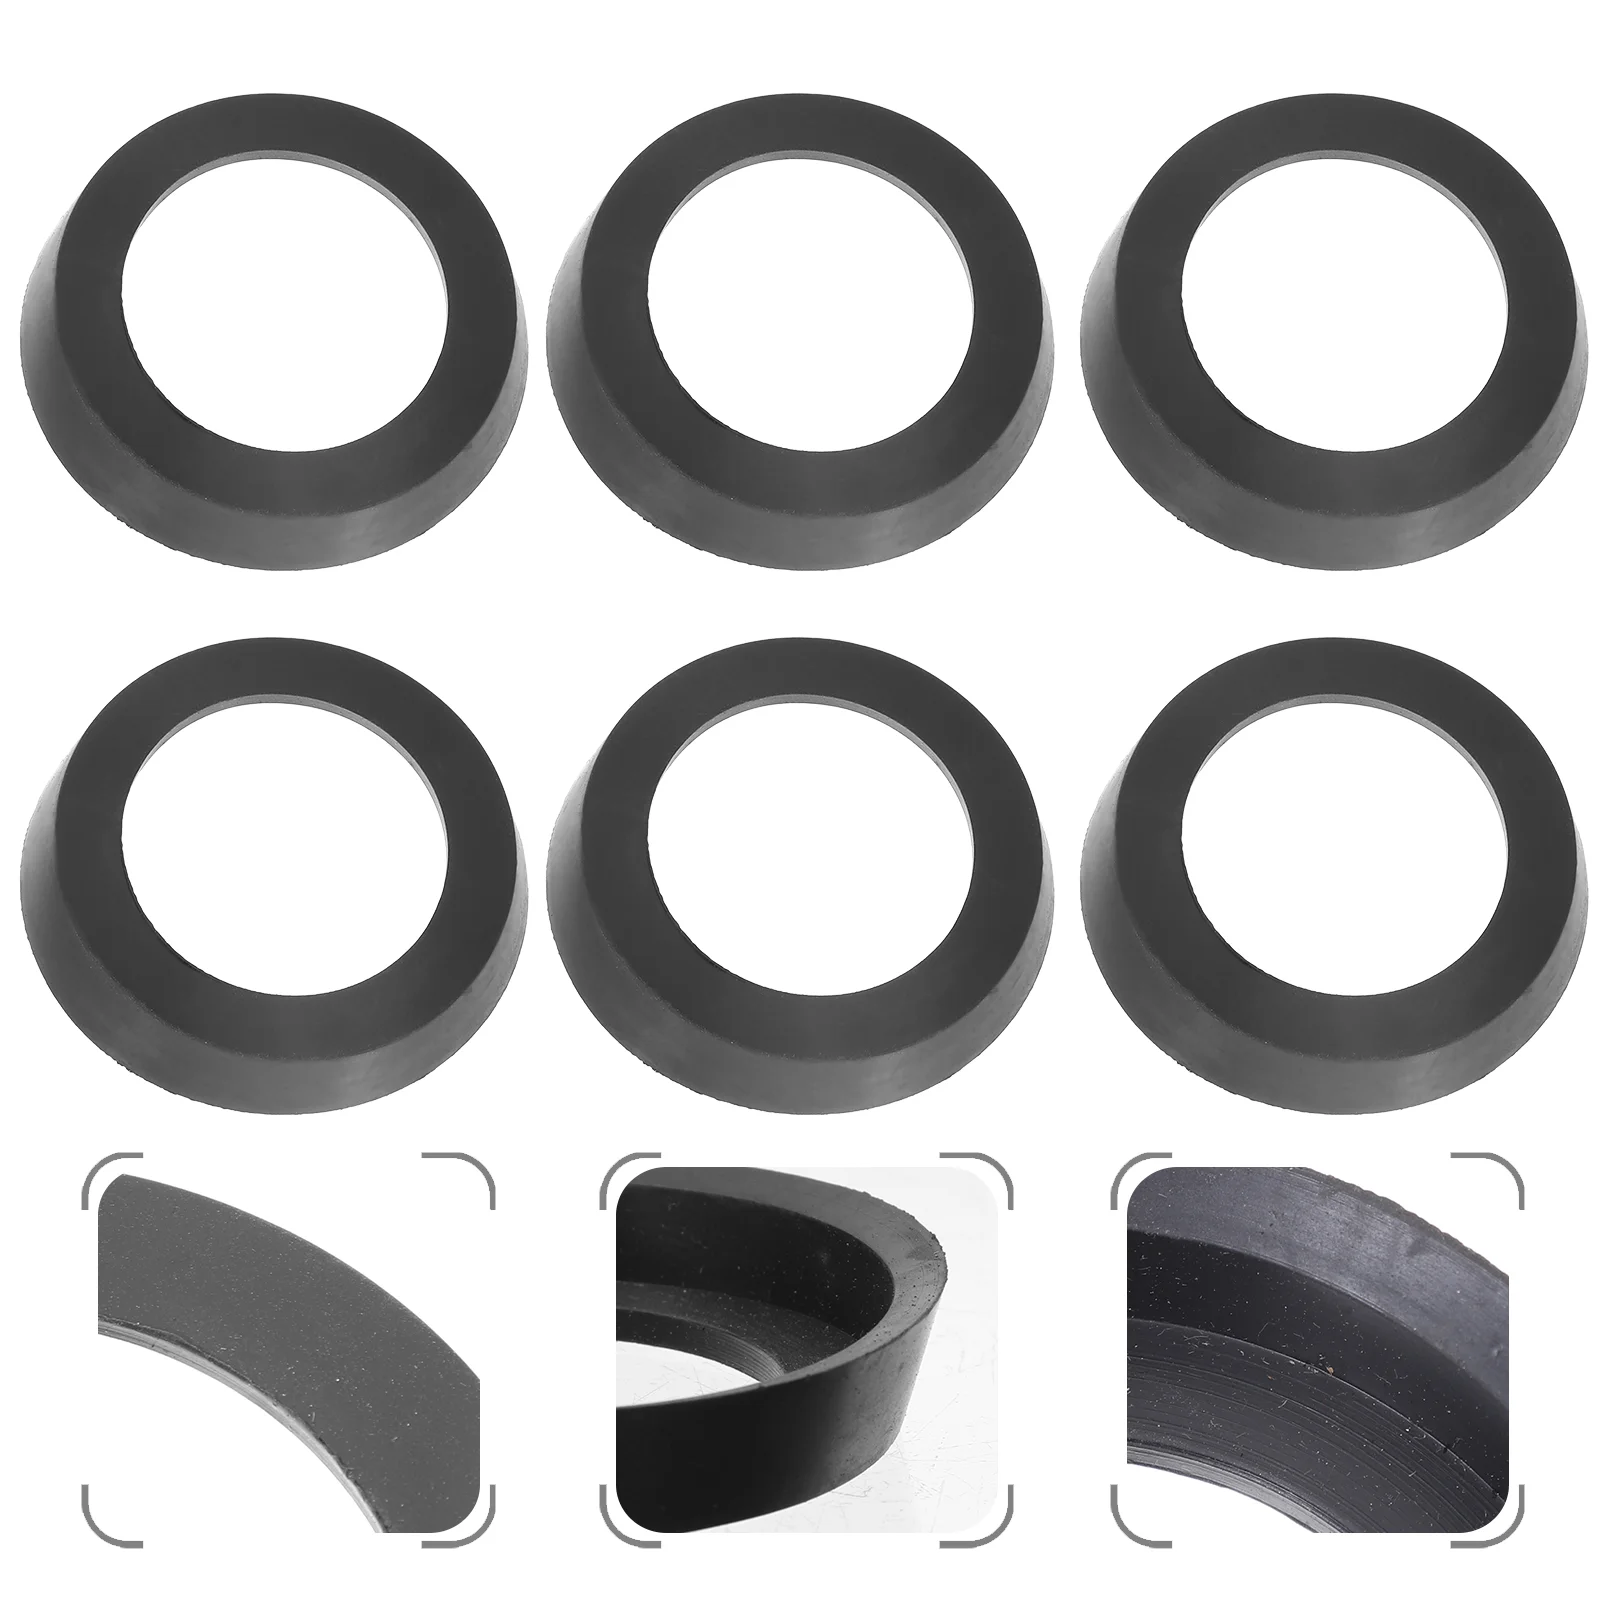 

6 Pcs Hand Pump Cup Water Seal for Pitcher Universal Rubber Replacement Drive Accessories Jug